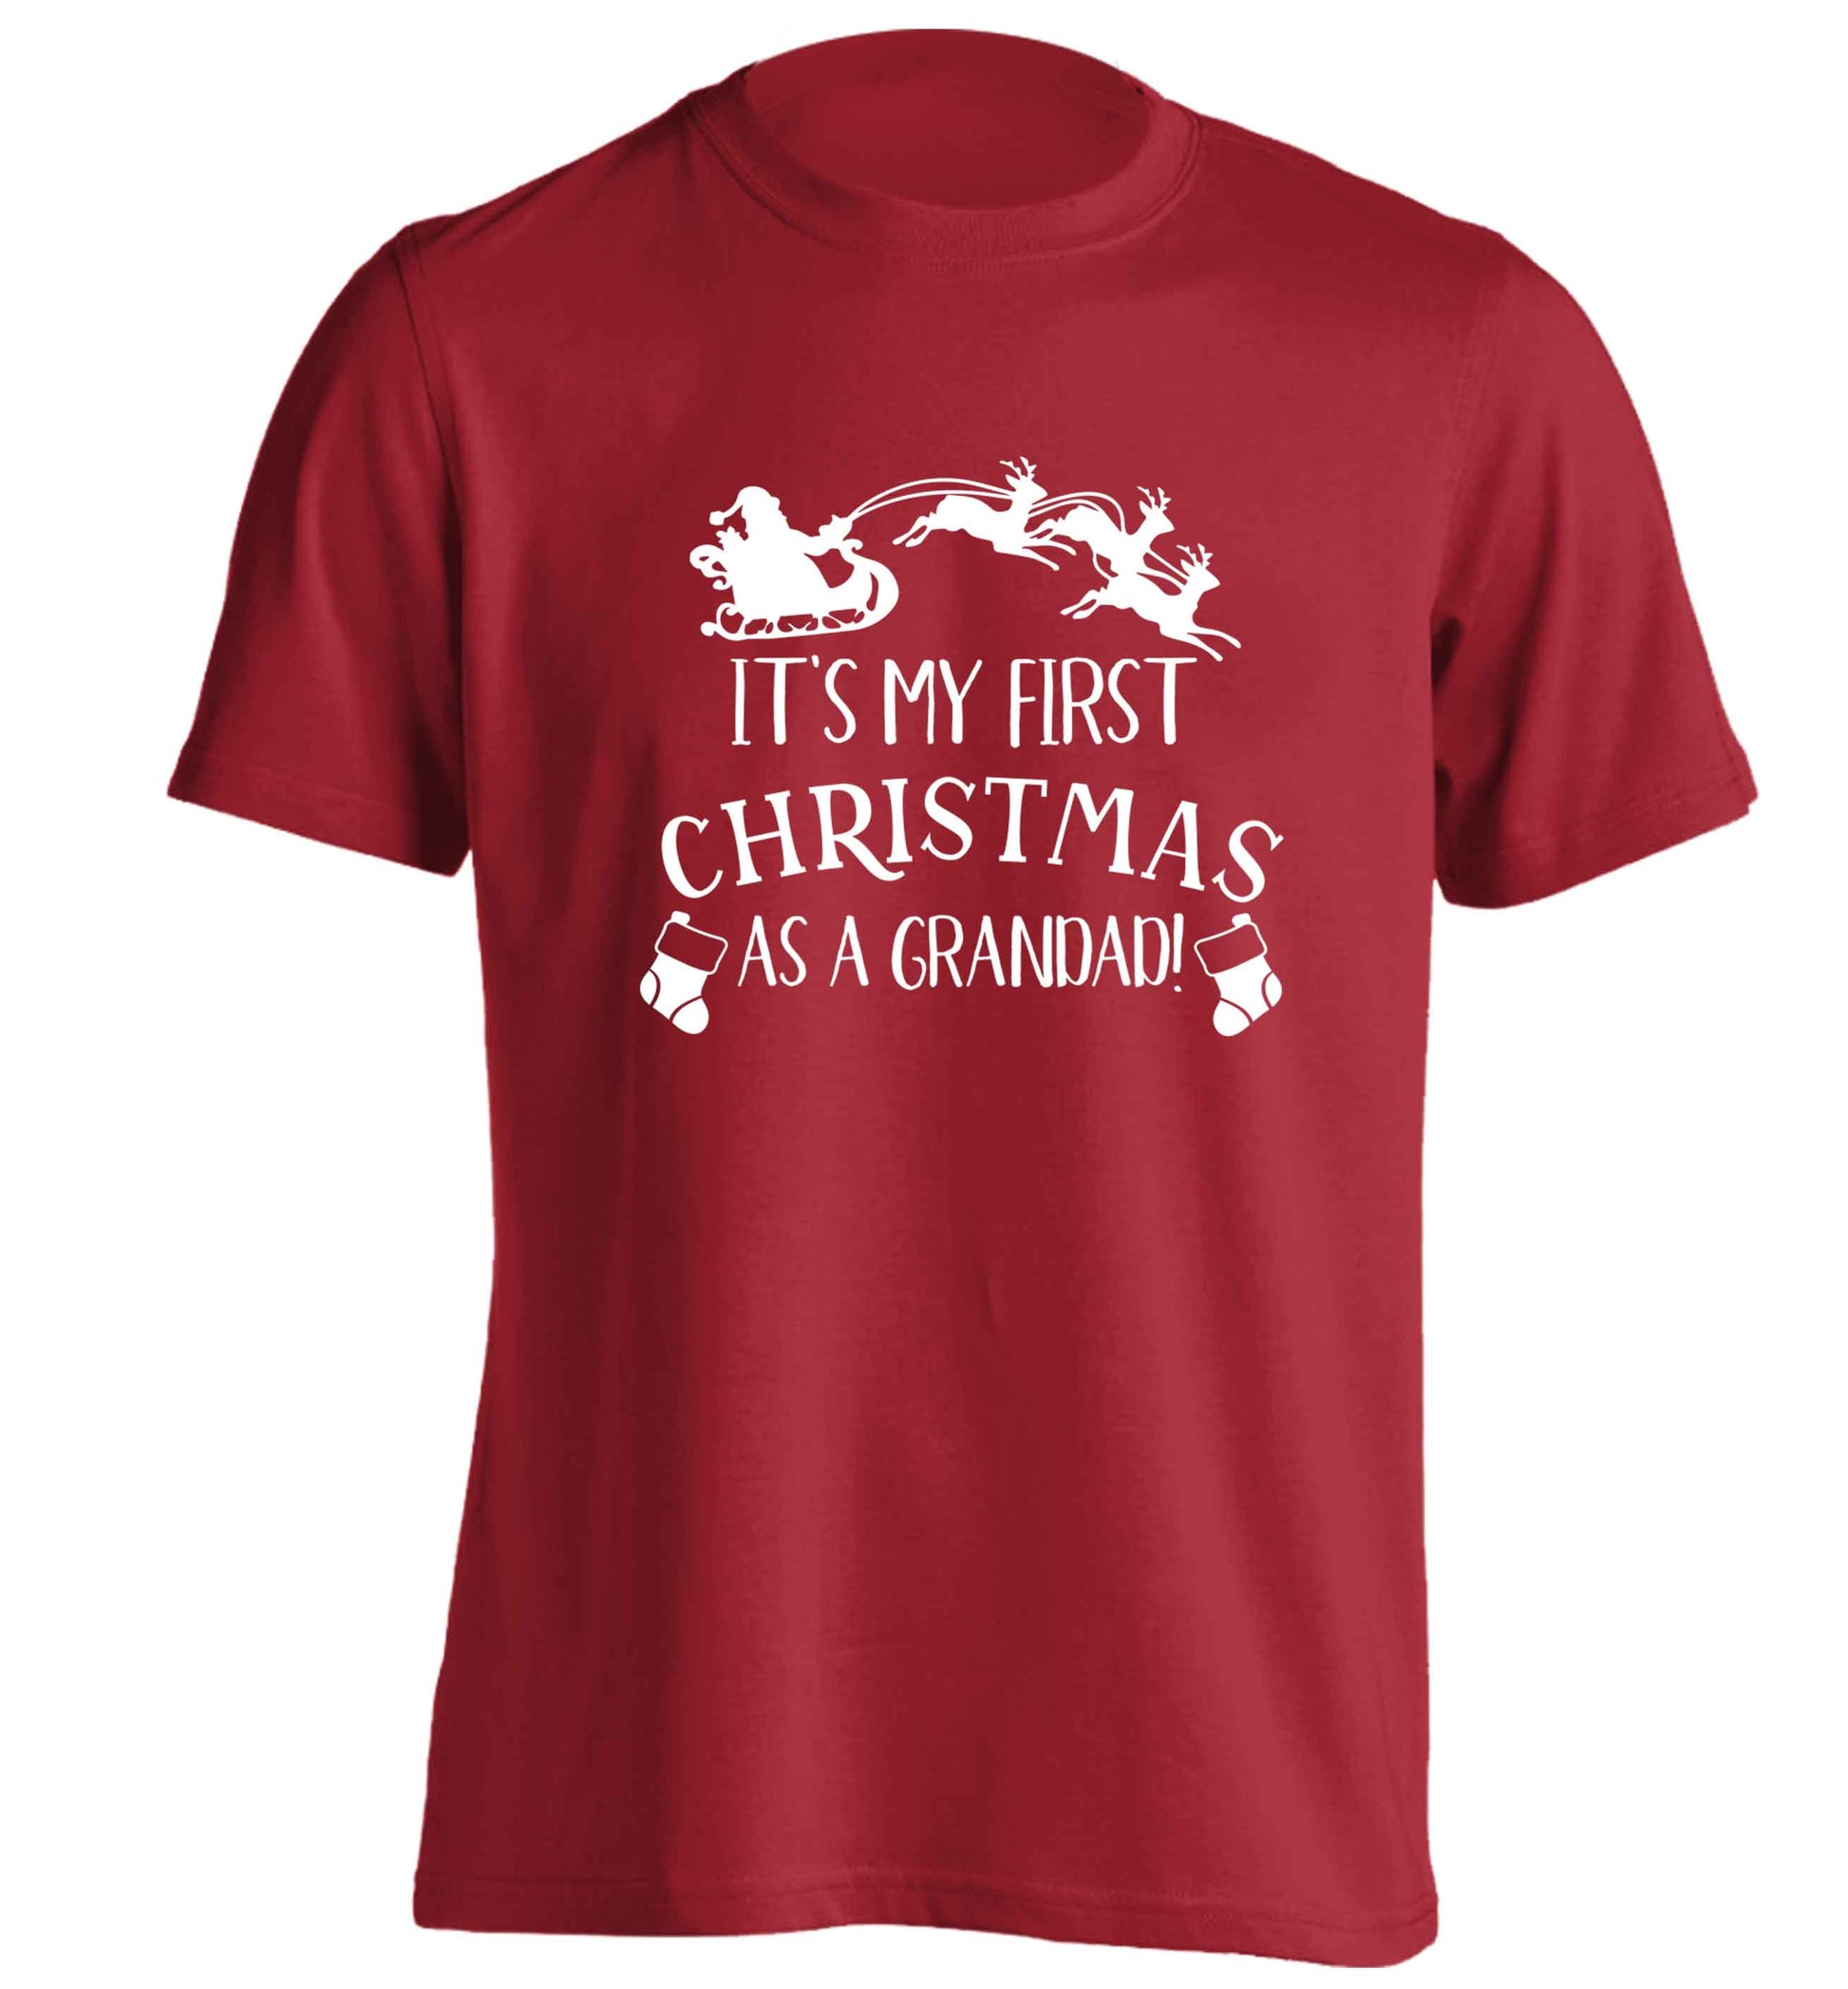 It's my first Christmas as a grandad! adults unisex red Tshirt 2XL